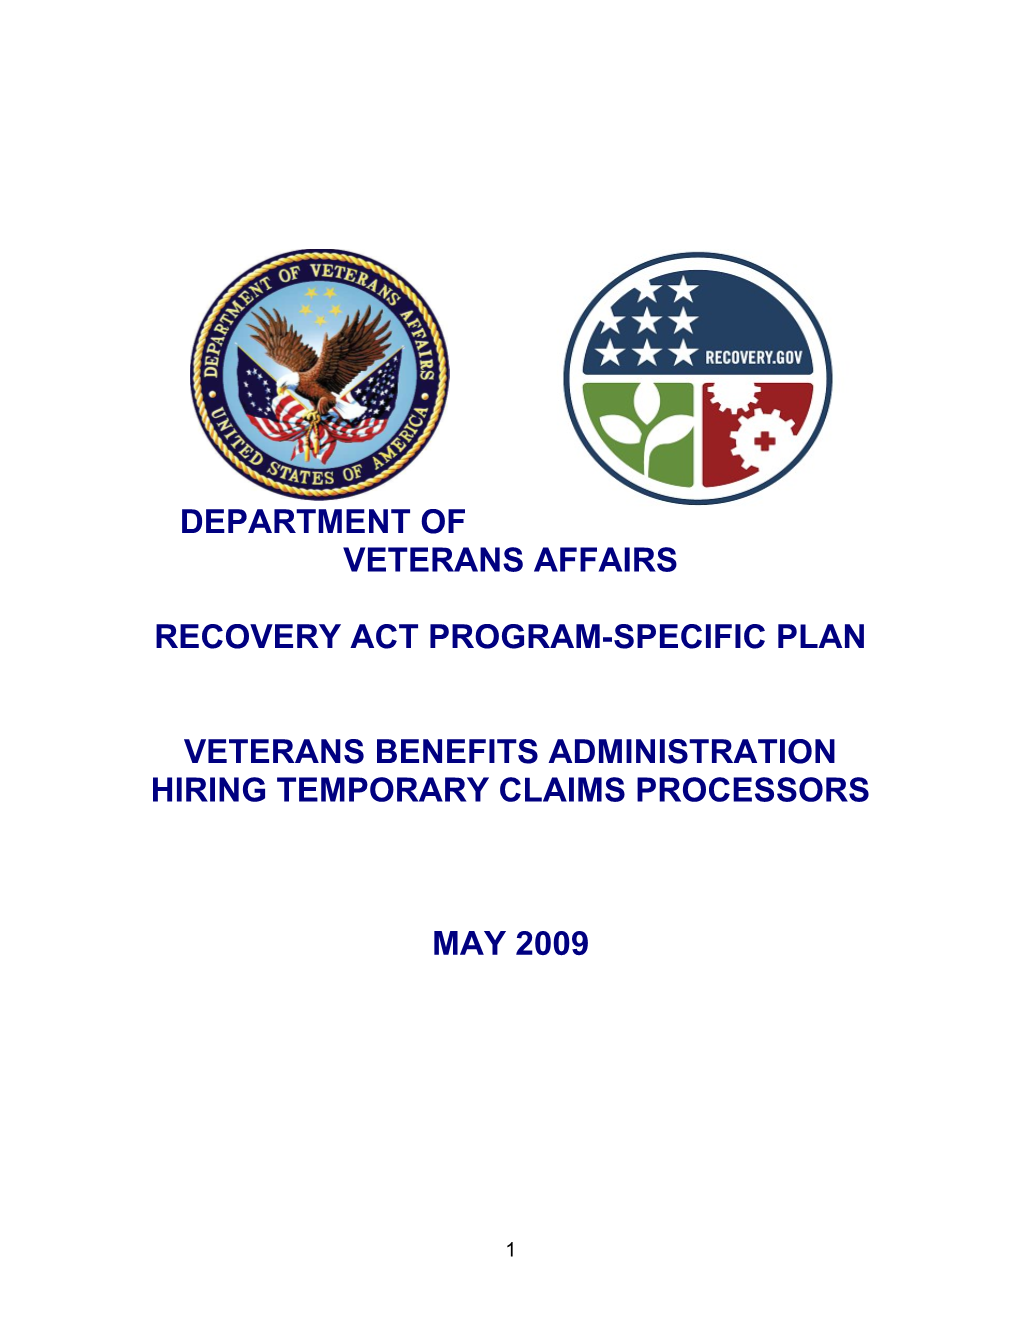 Recovery Act Program-Specific Plan